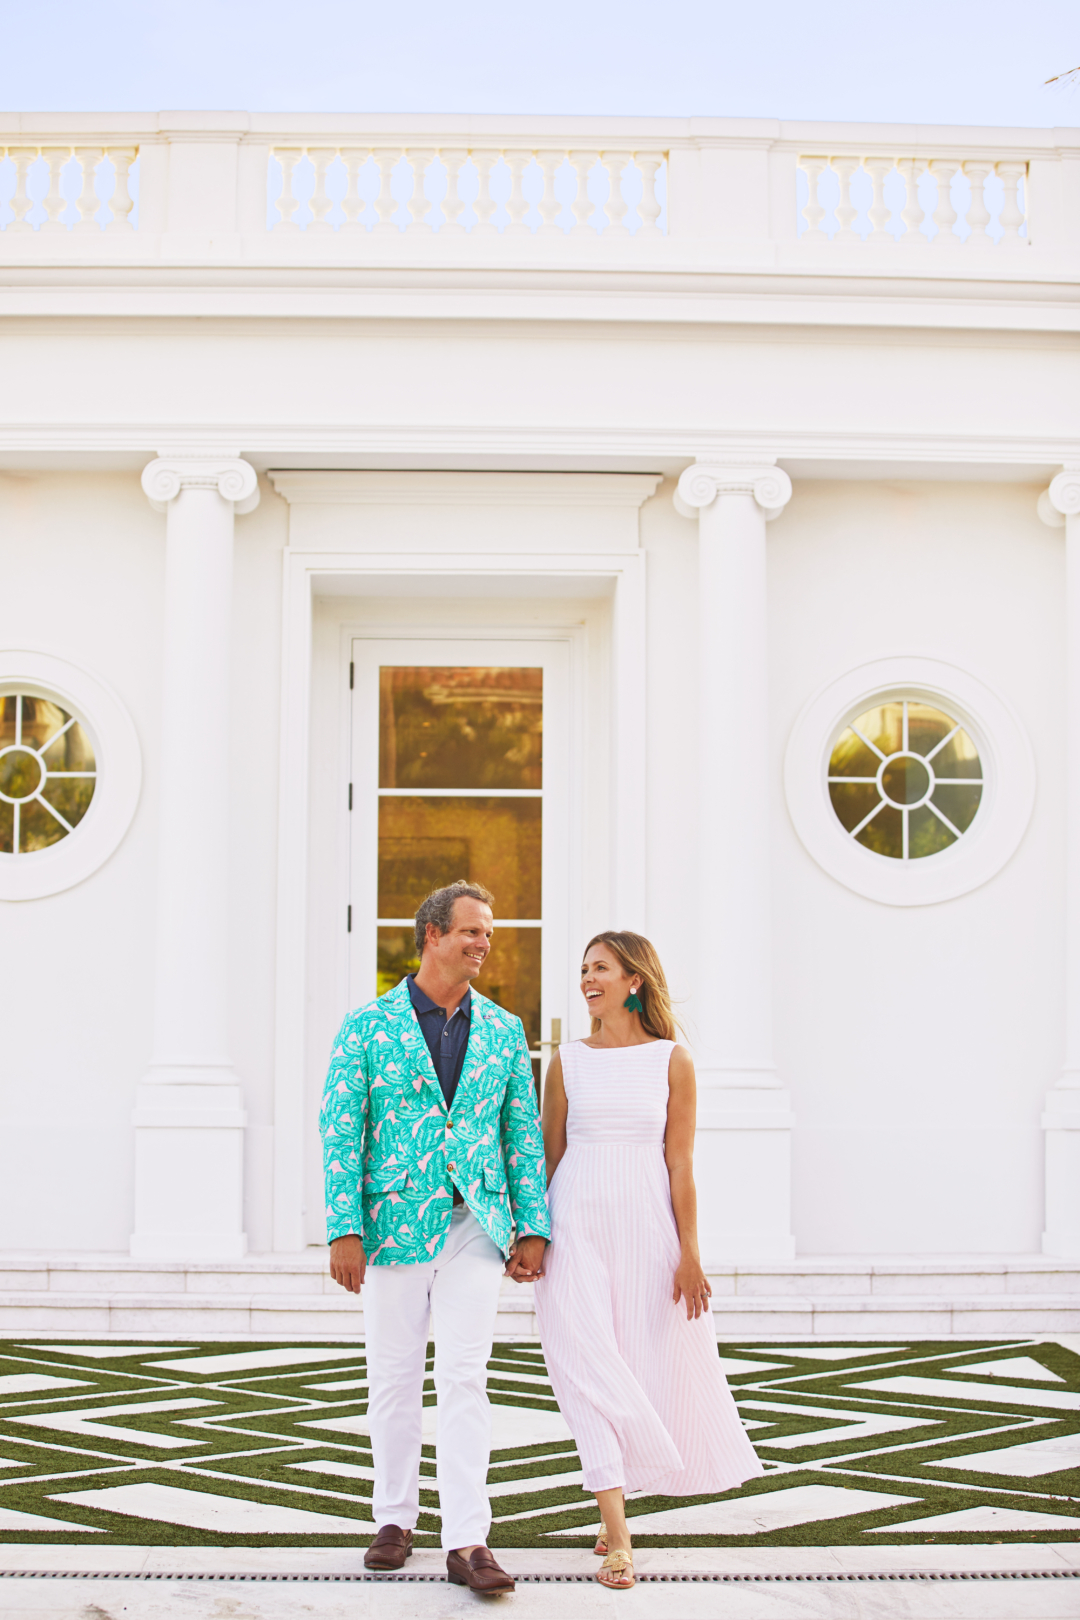 Fashion: vineyard vines x Palm Beach Lately's new collection is here!